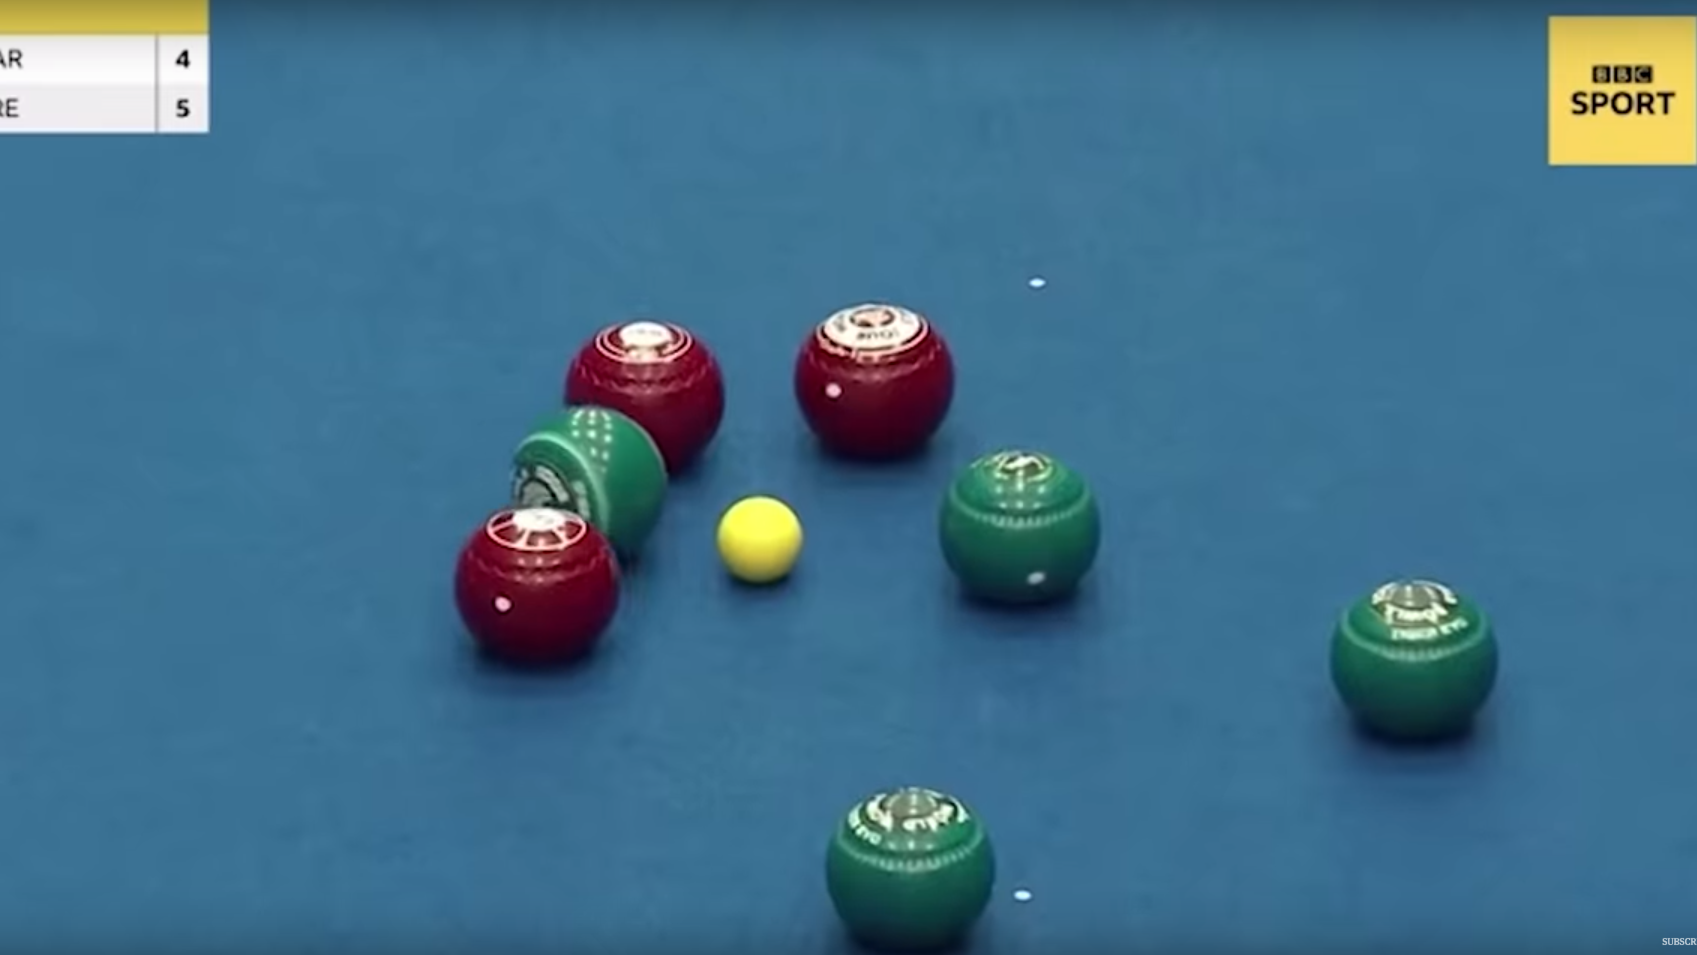 Indoor bowls provides all-time great sports highlight with impossible ball-splitting feat